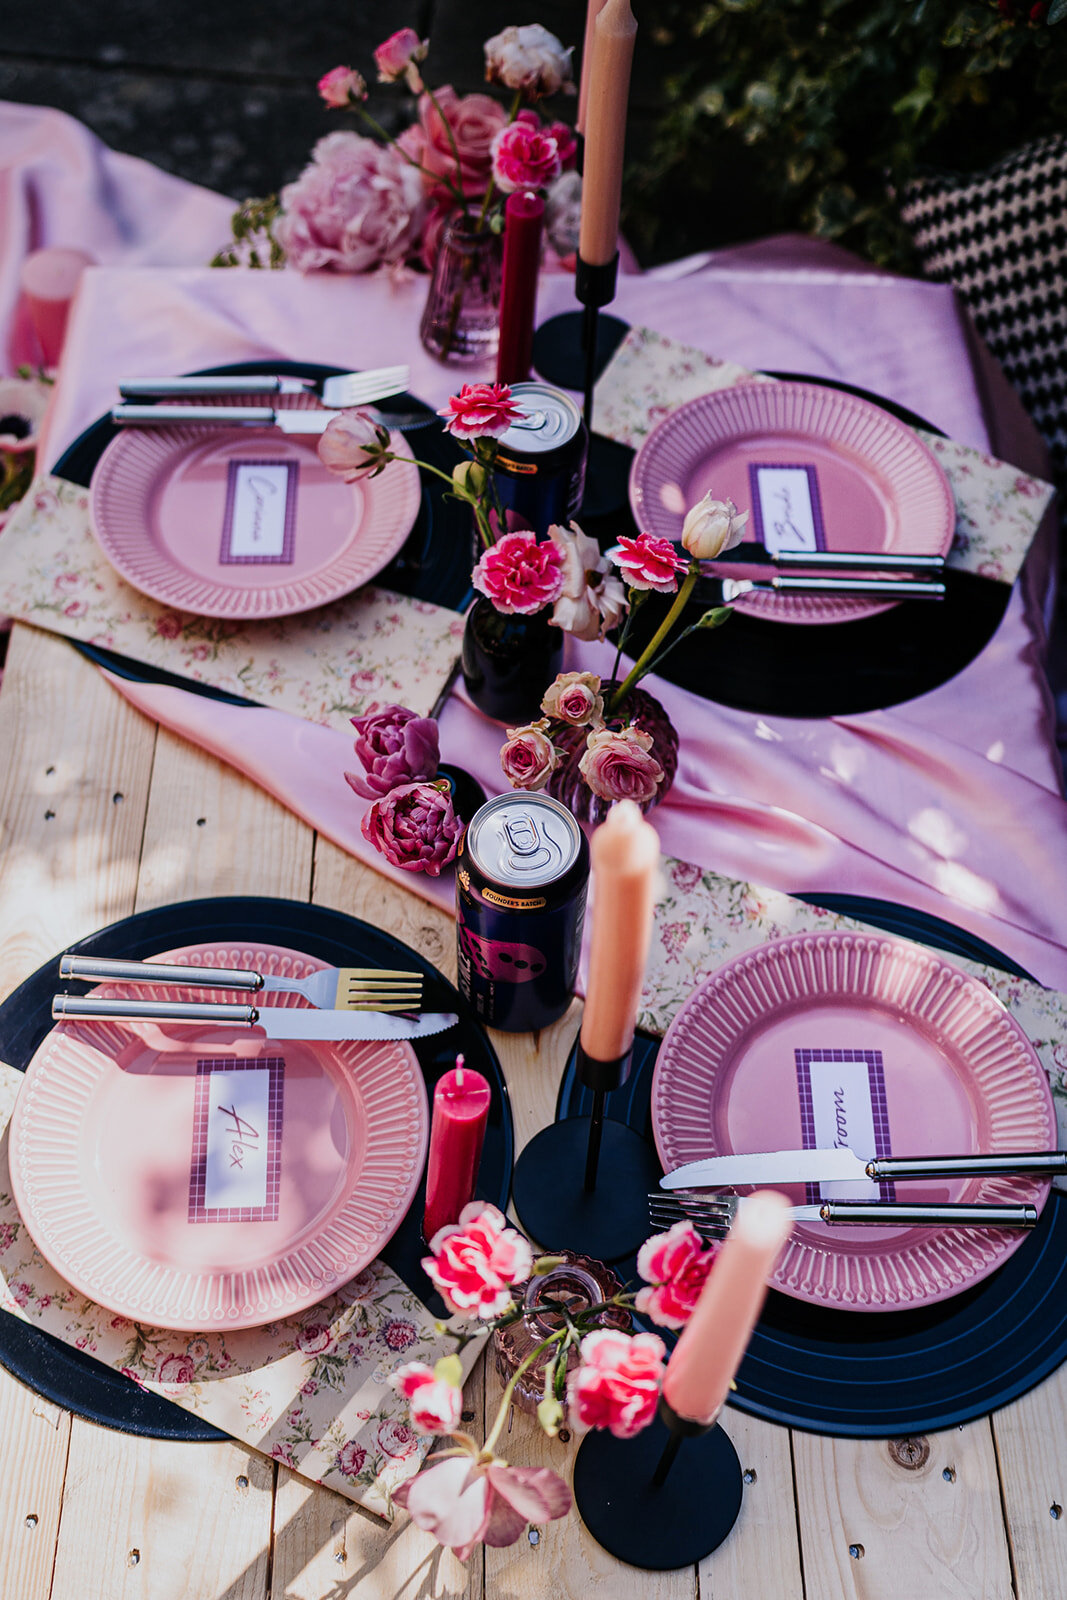 pink place settings for 4 people